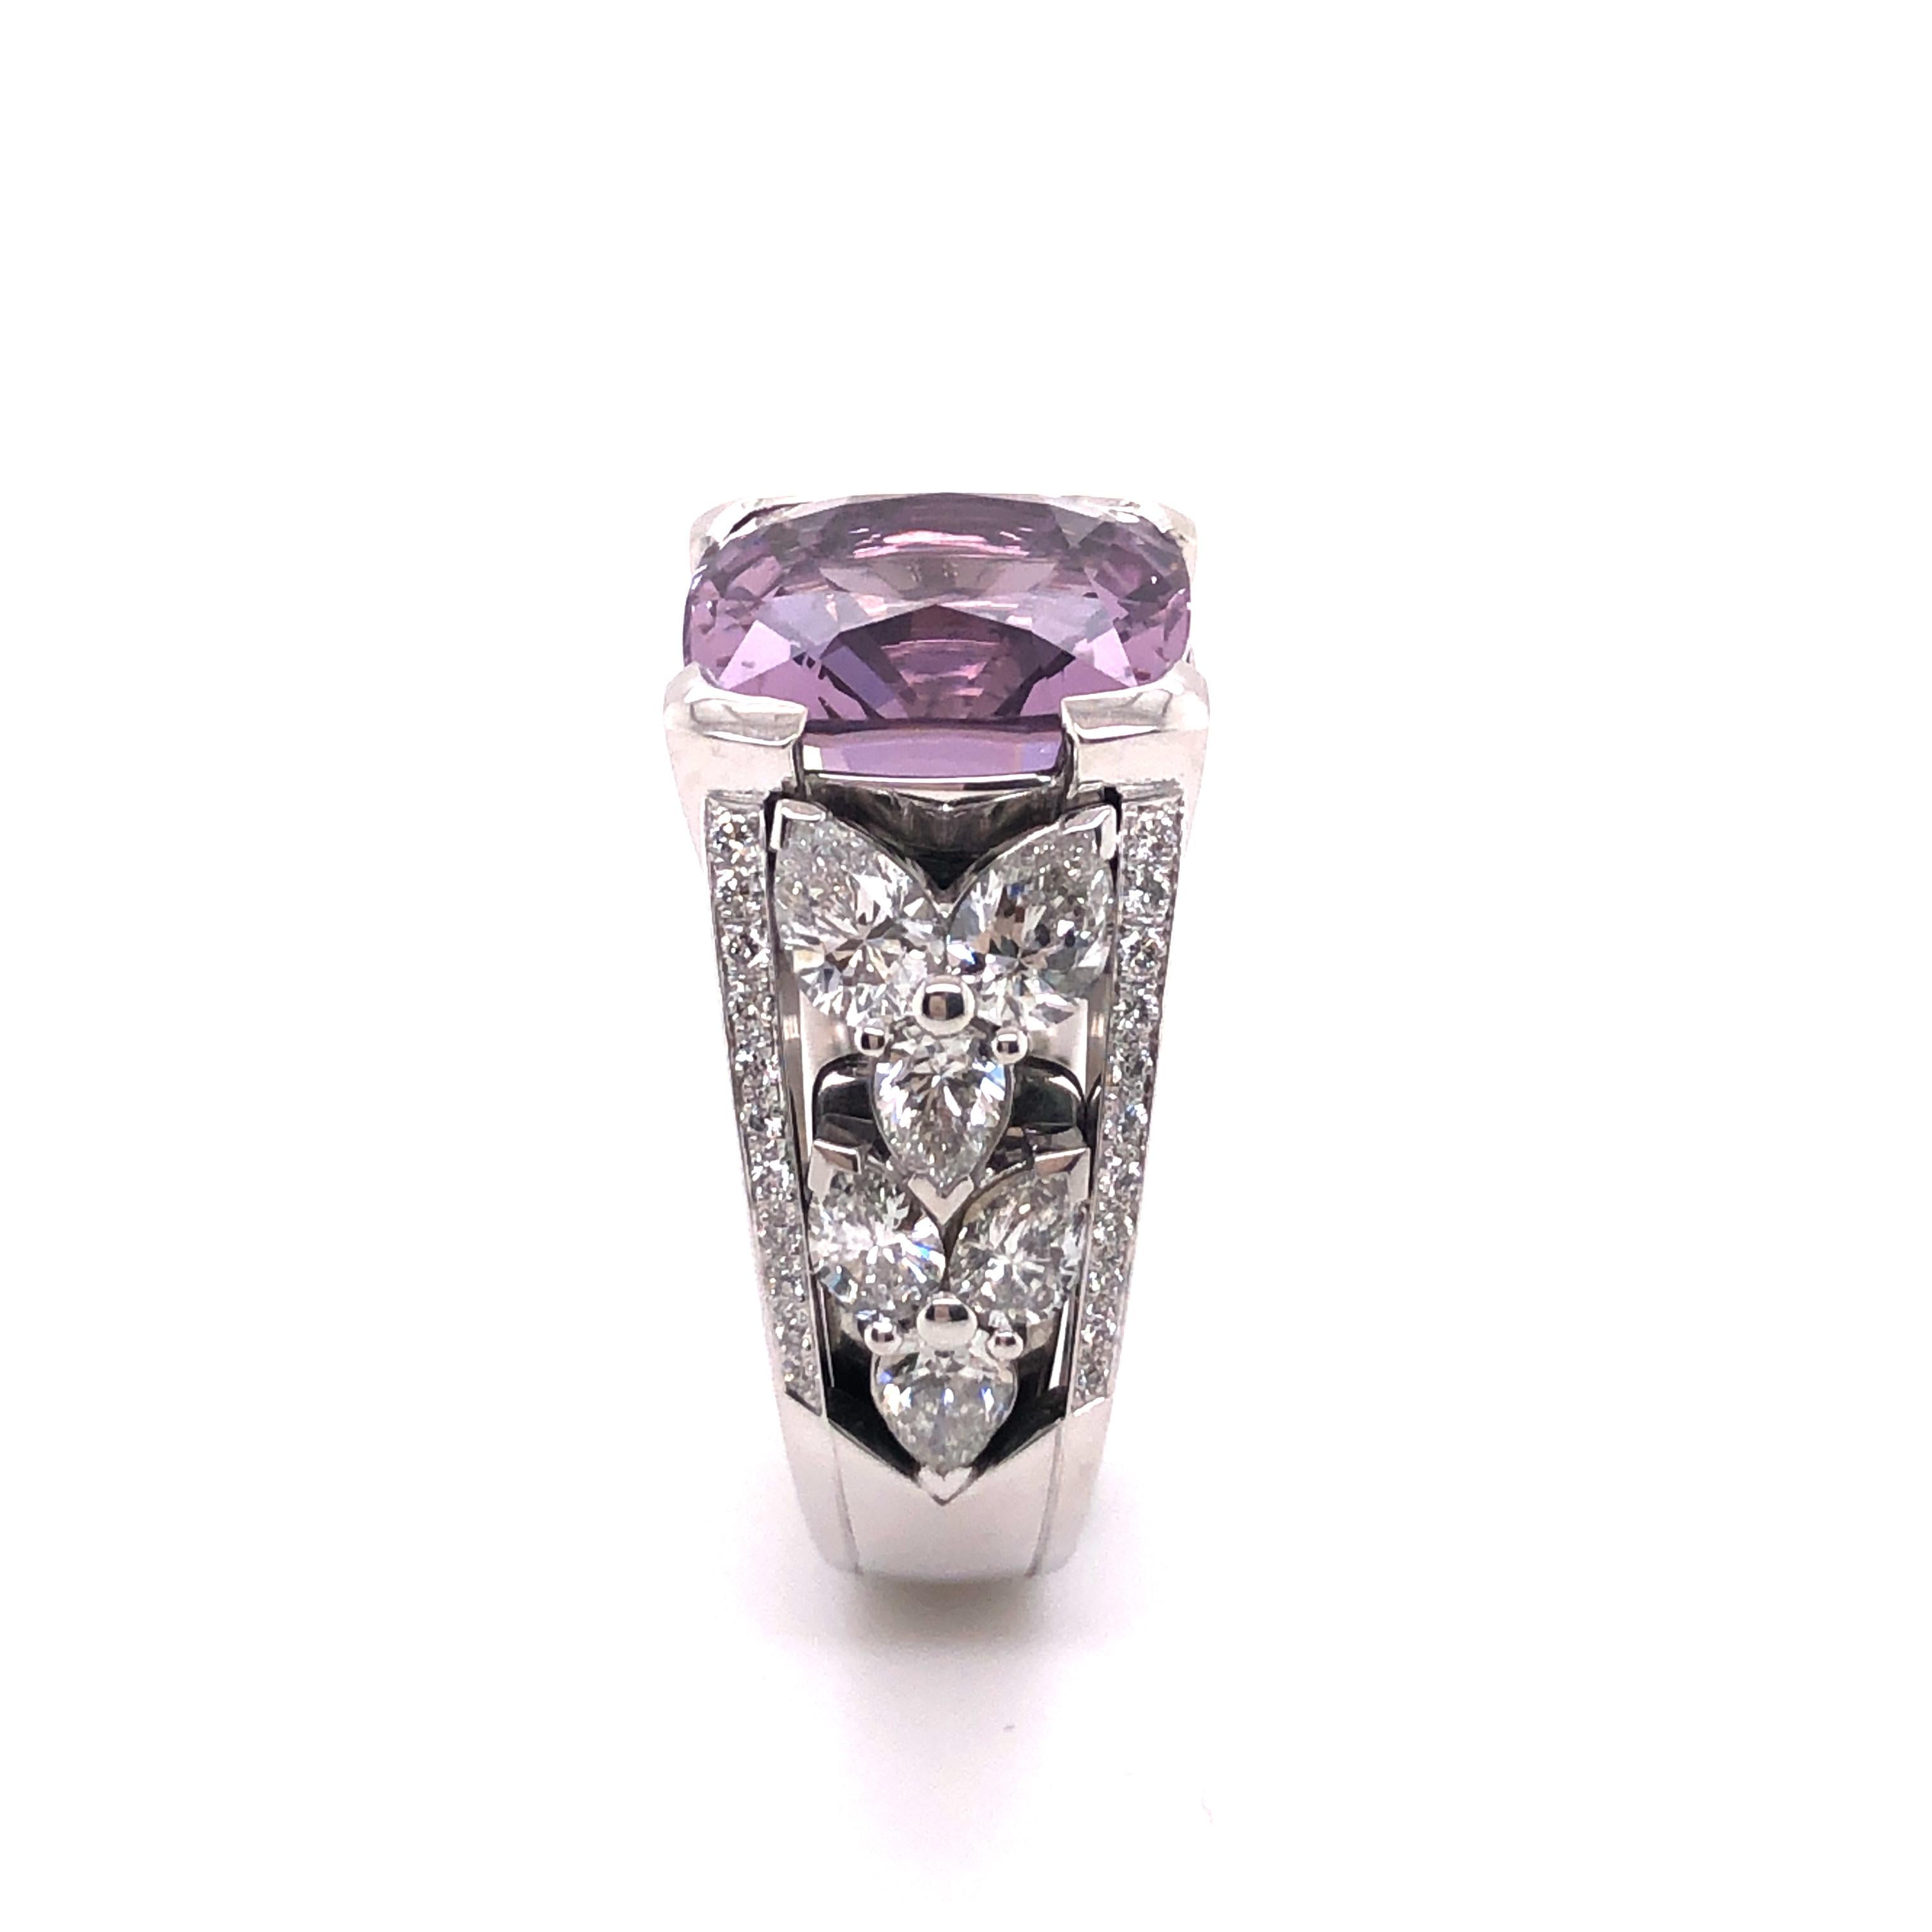 Certified 8.90 Ct Violet Burmese Spinel and Diamond Ring in 18 Karat White Gold For Sale 4